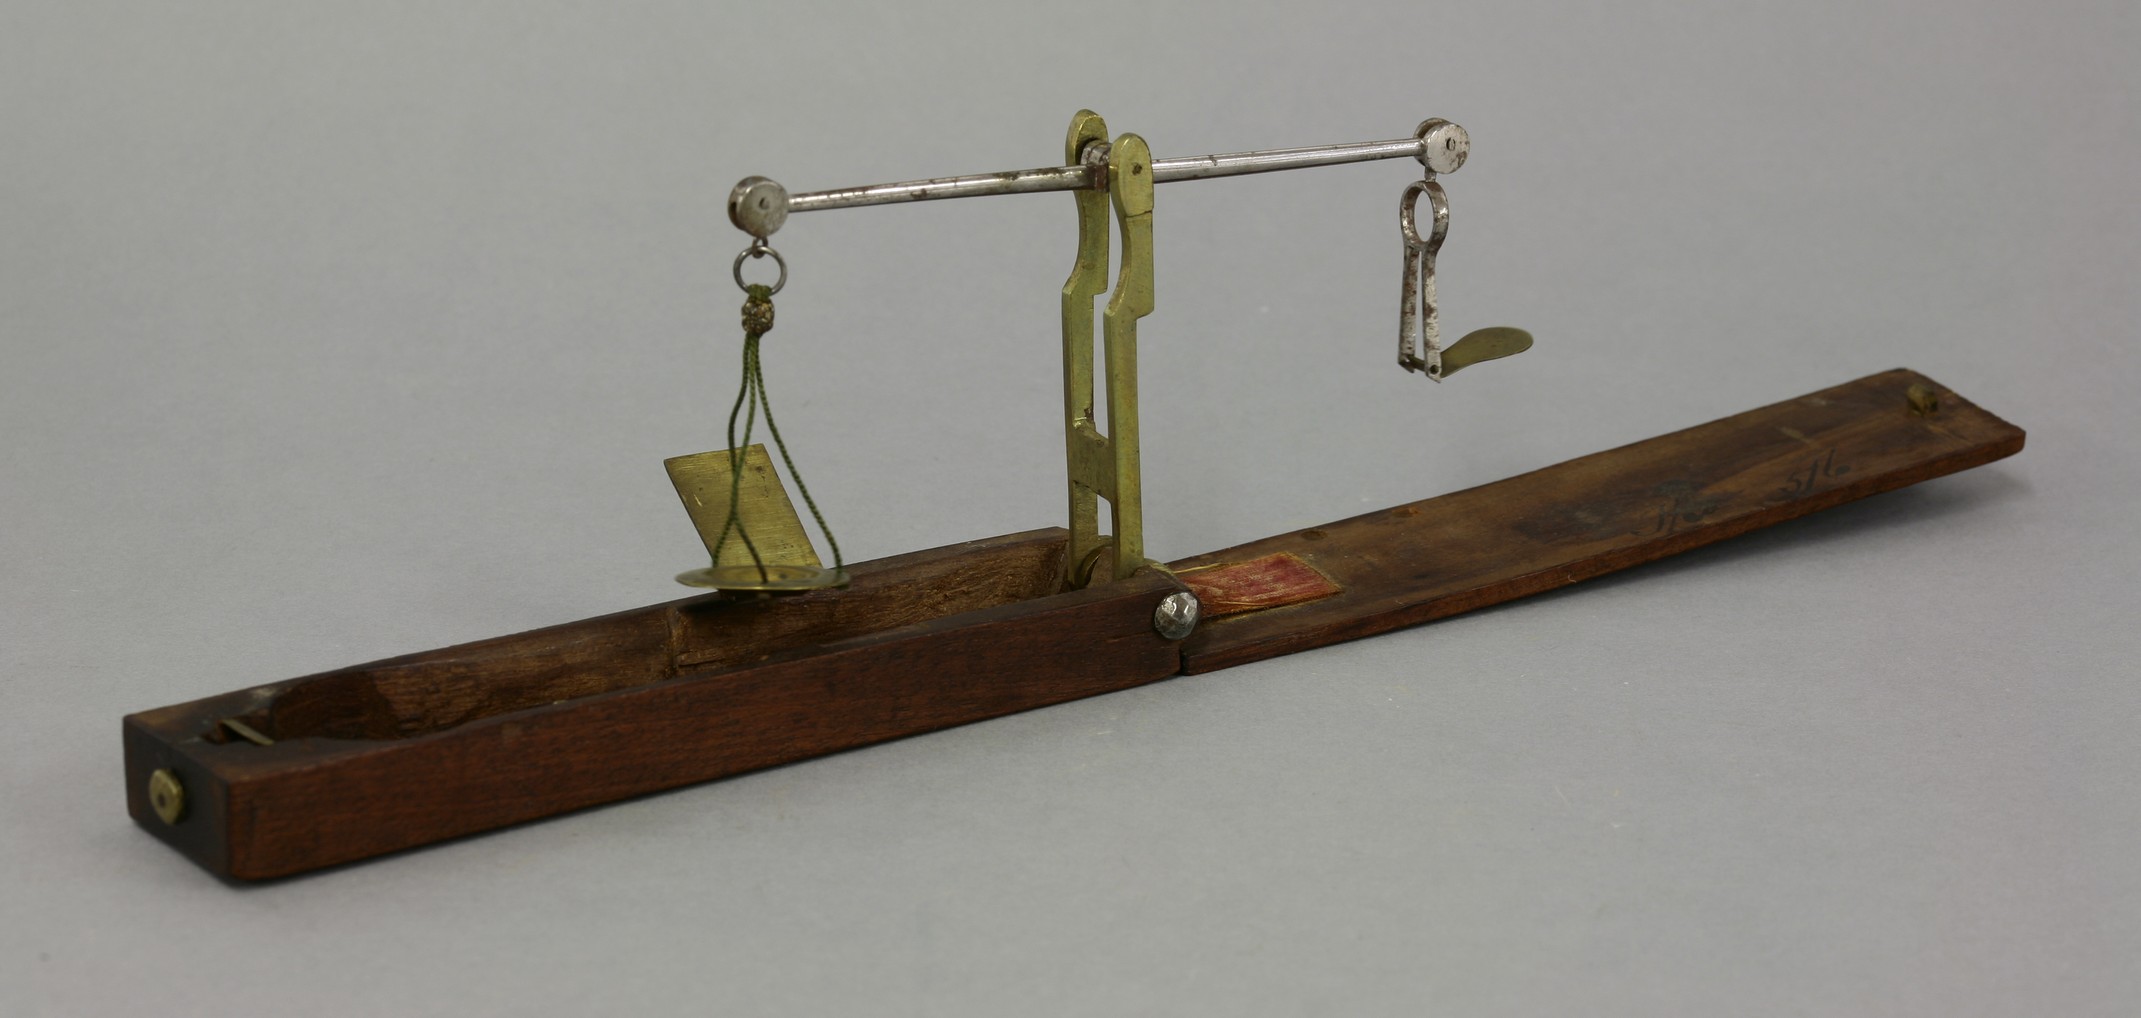 Attributed to Callingwood Ward, a brass and polished steel folding equal arm coin balance, circa